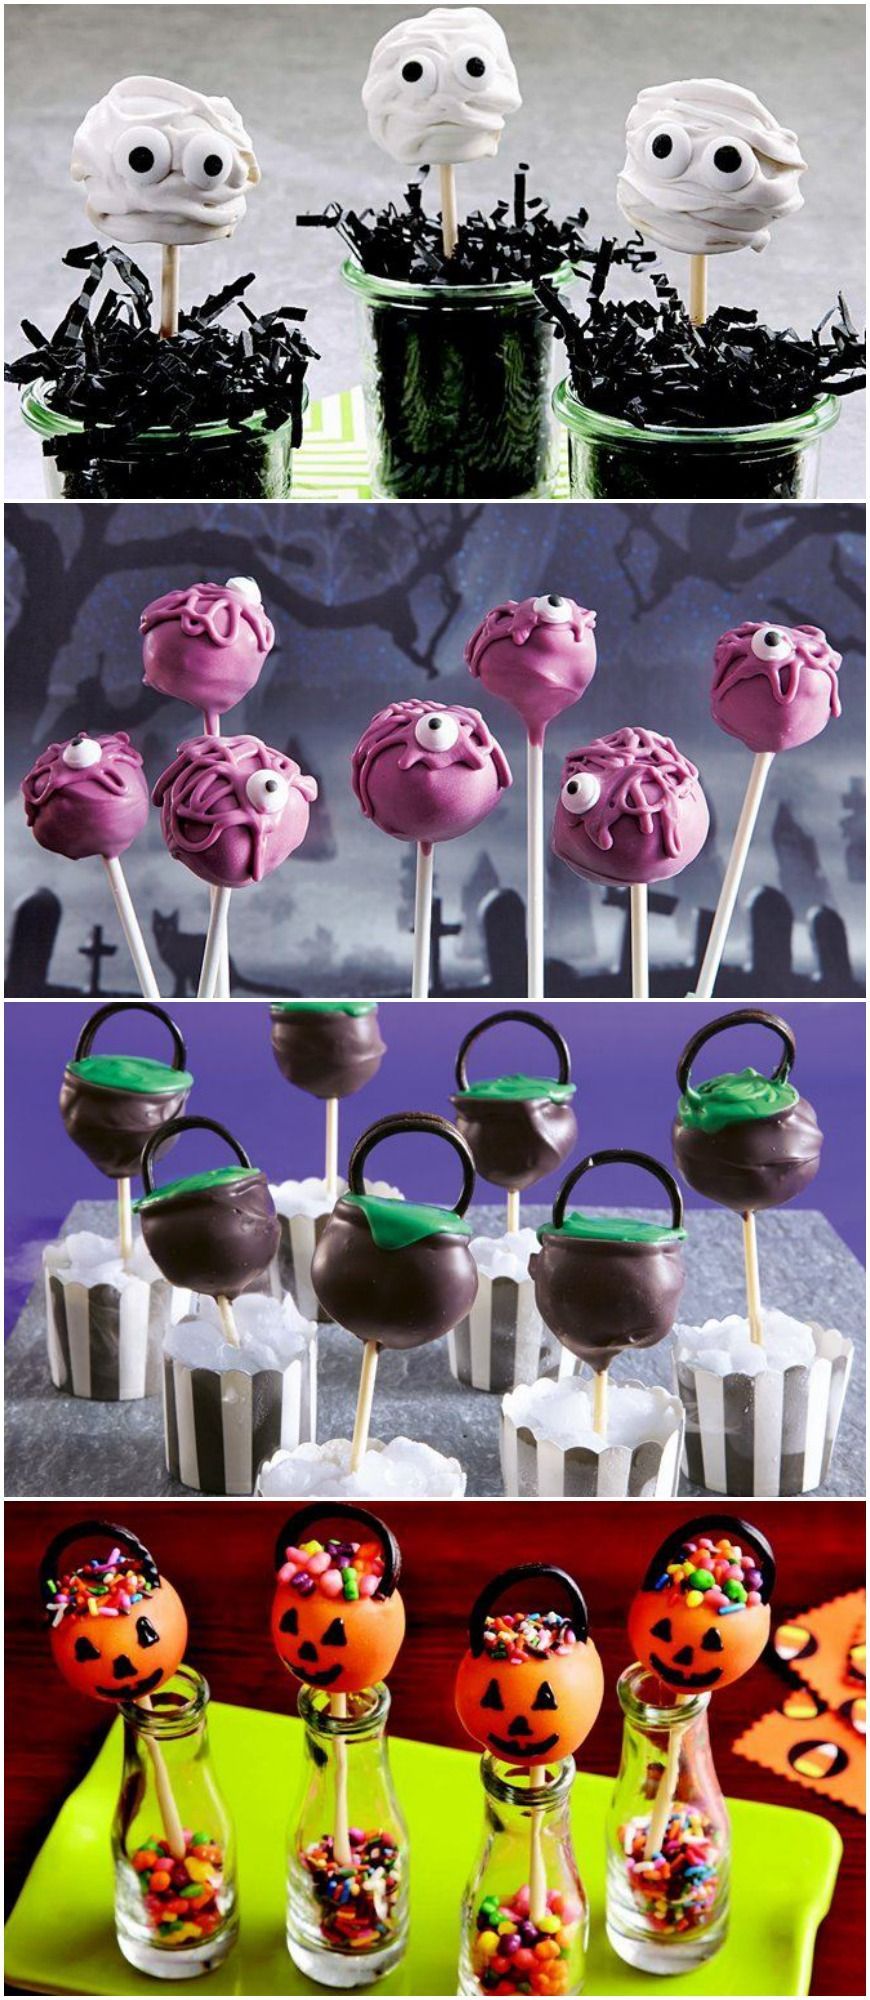 Make sure your Halloween is properly adorable with this yummy and spooky cake pops!